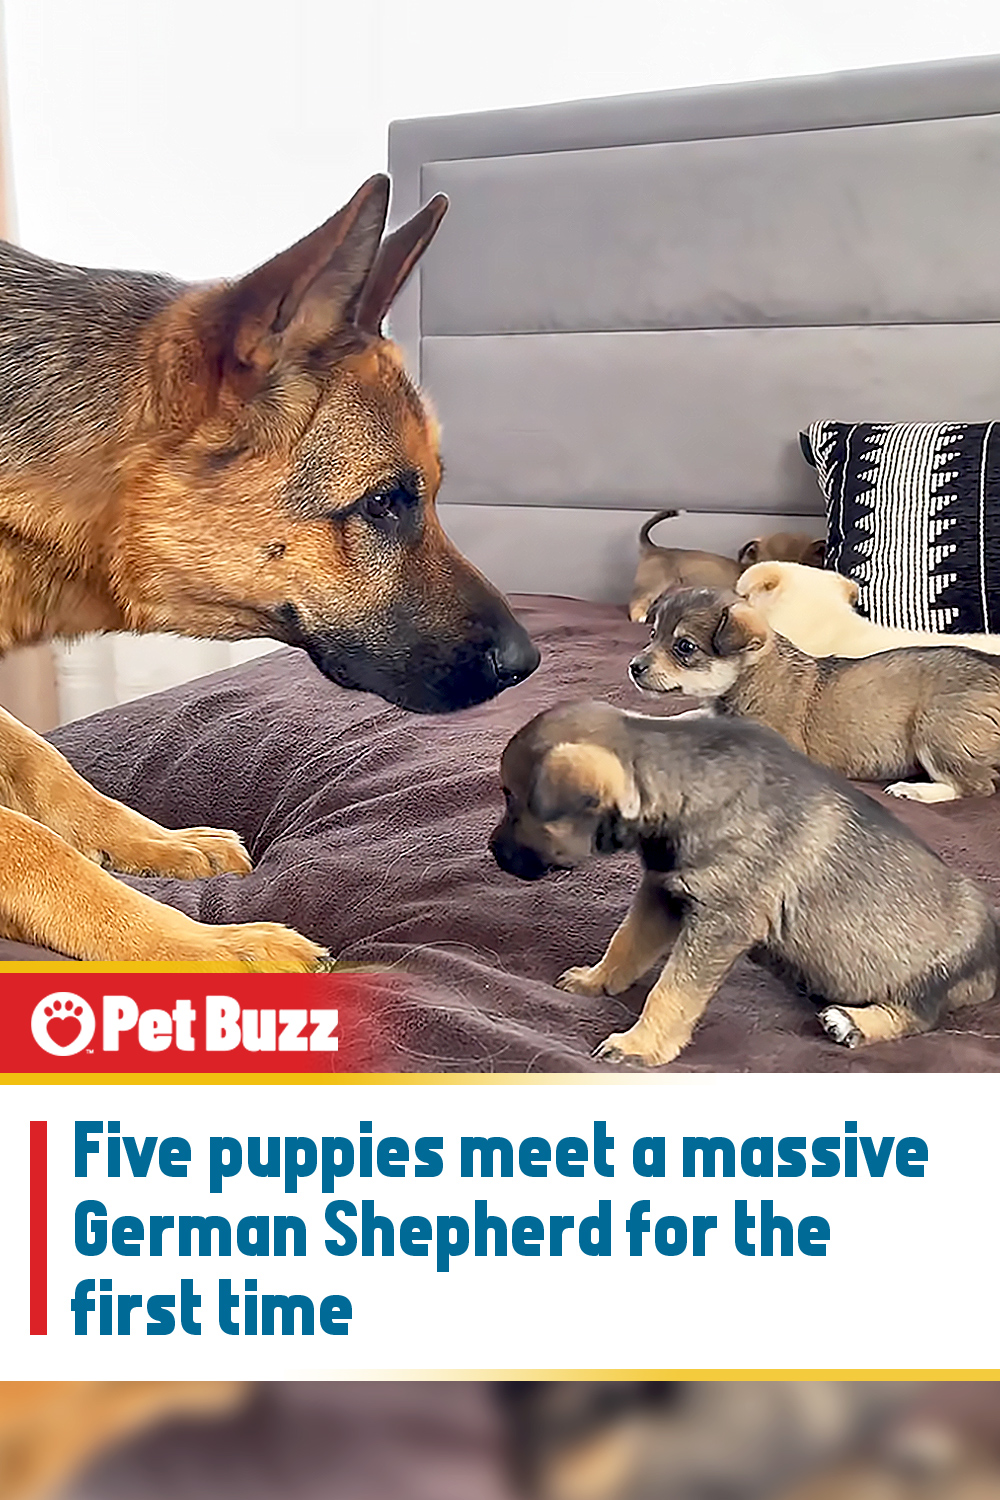 Five puppies meet a massive German Shepherd for the first time